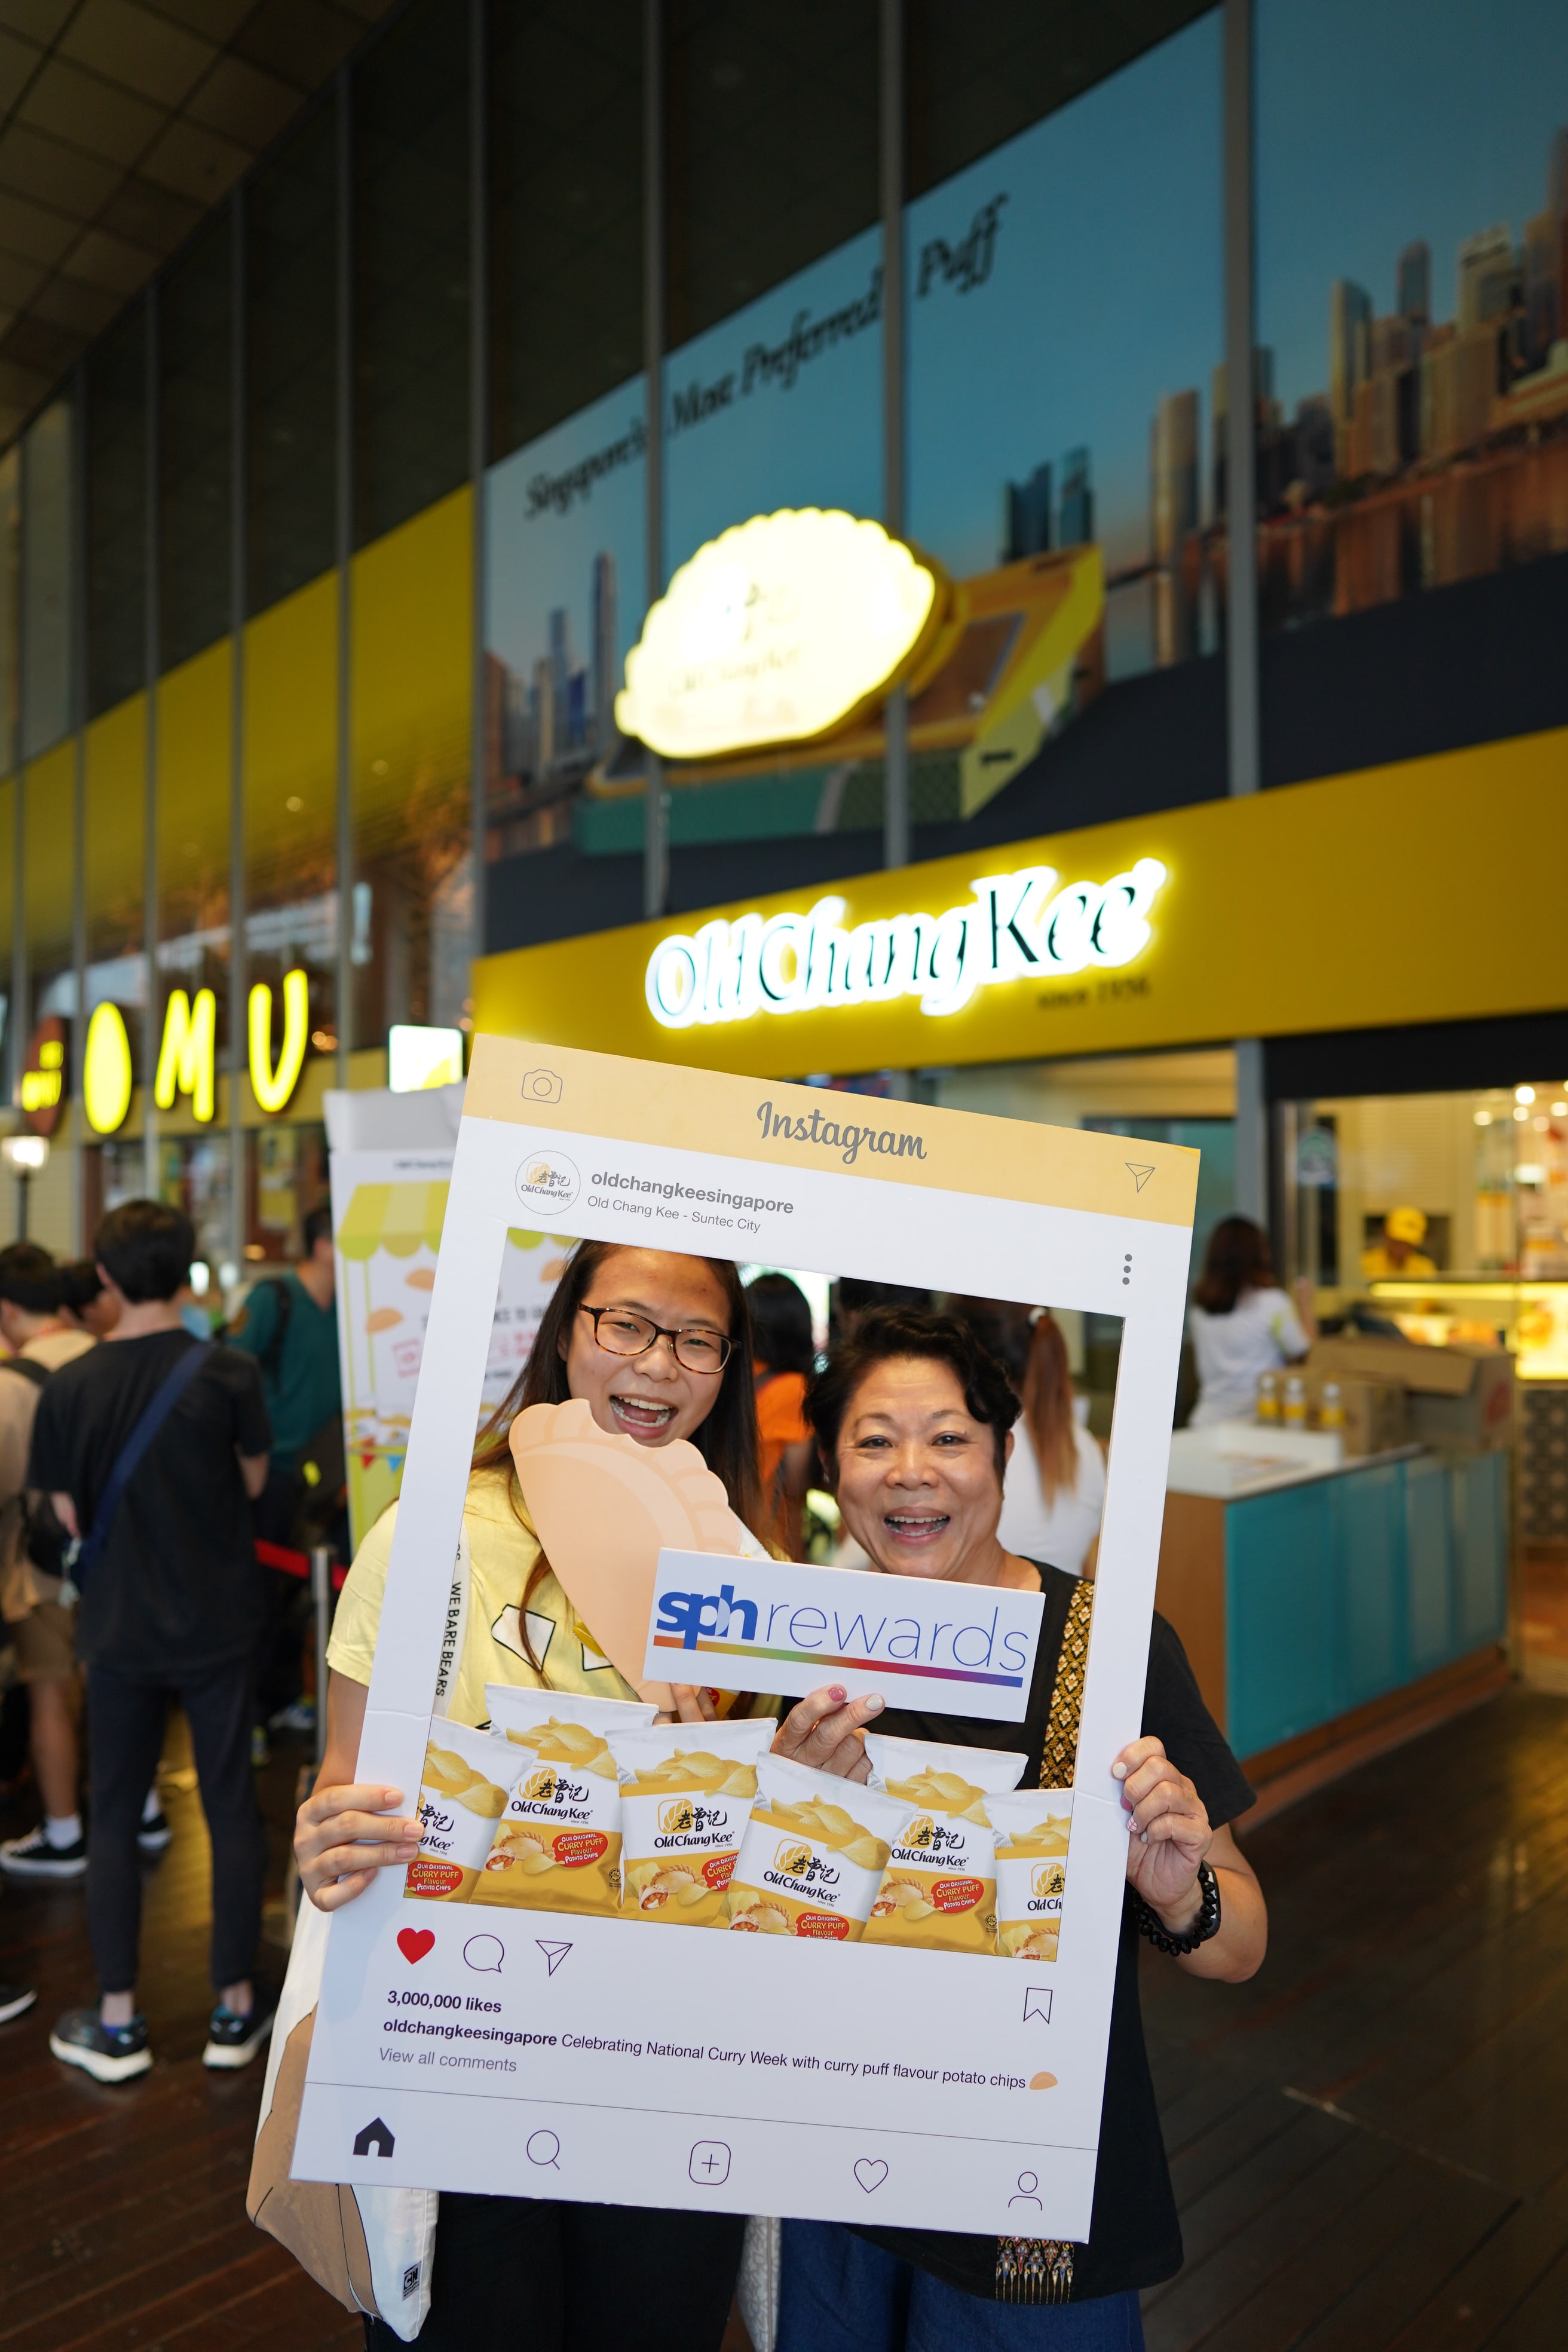 OCK  x SPH Rewards Curry Potato Chips Product Launch _4_-min